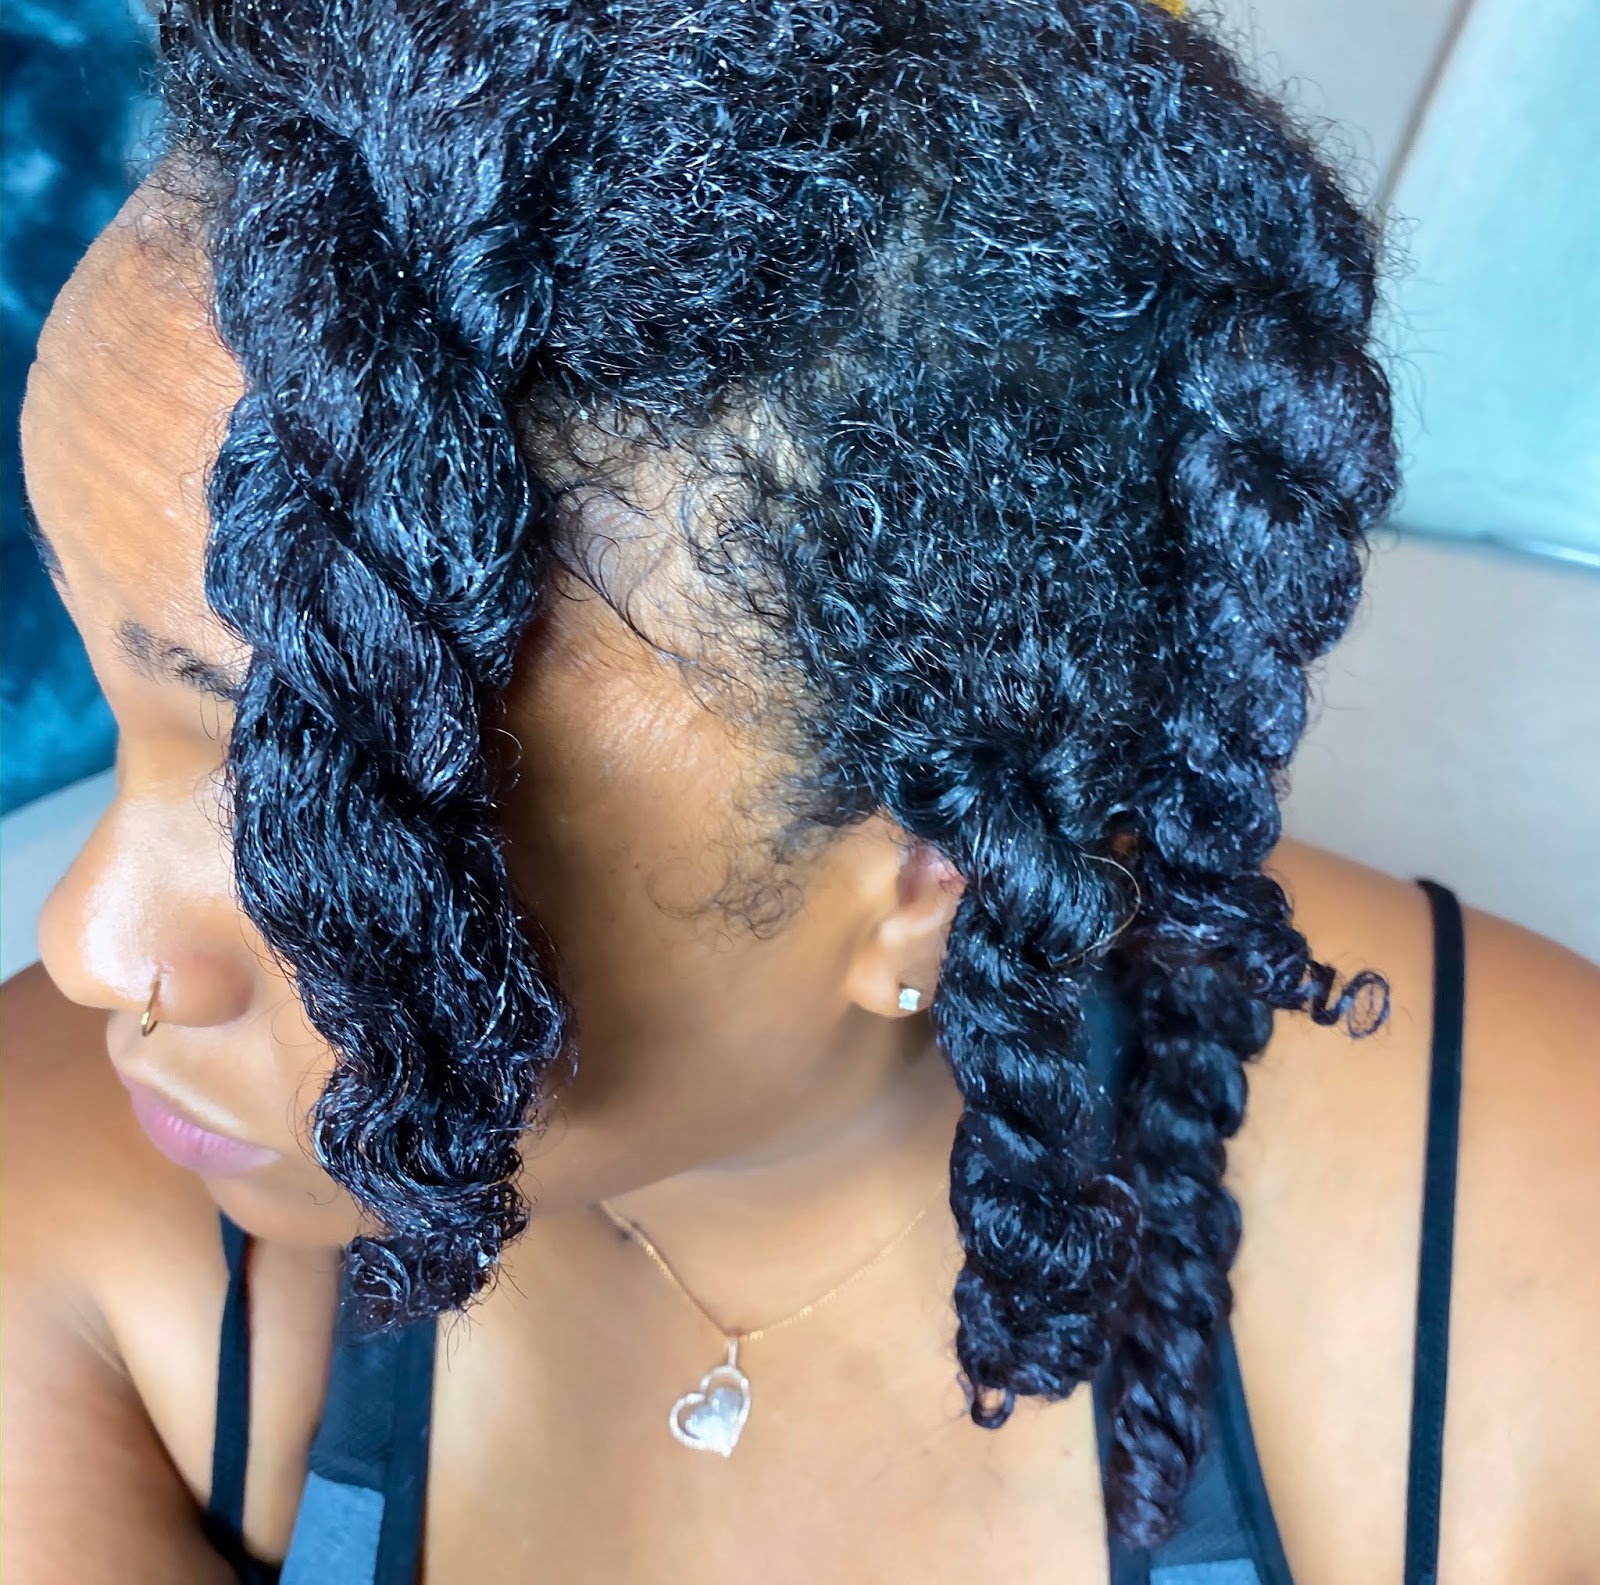 54 HQ Images How To Keep Natural Black Hair Moisturized : 15 Best Curl Creams For Natural Hair Of 2020